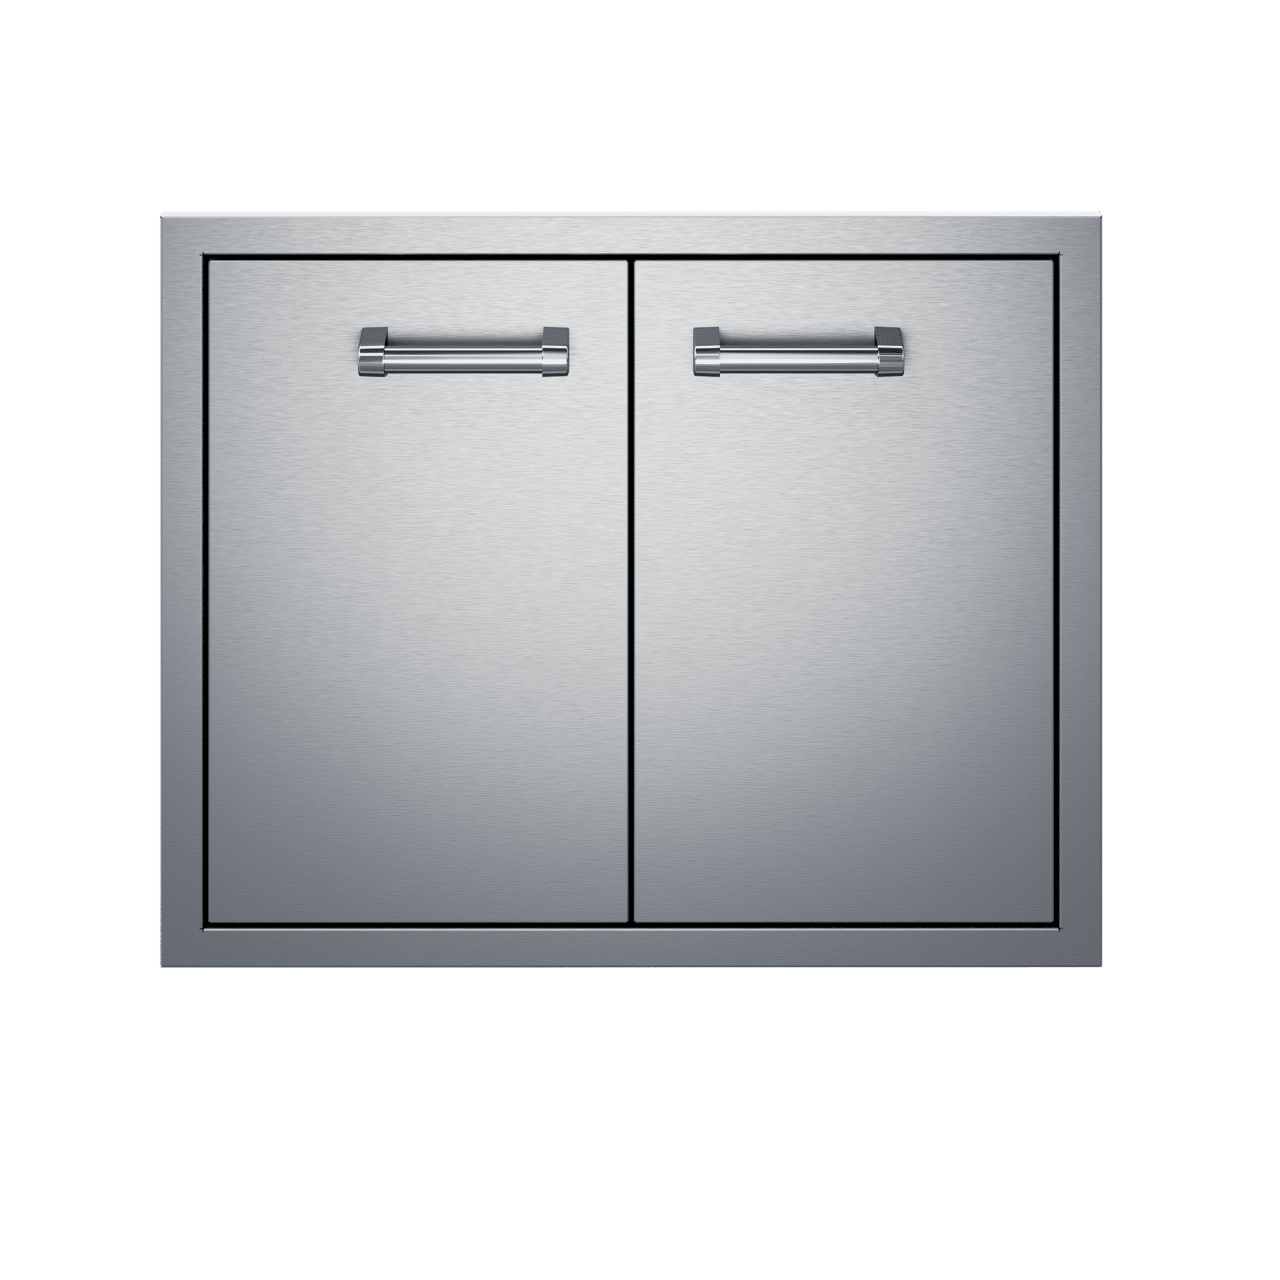 Delta Heat Stainless Steel Double Access Doors Cabinets & Storage 26